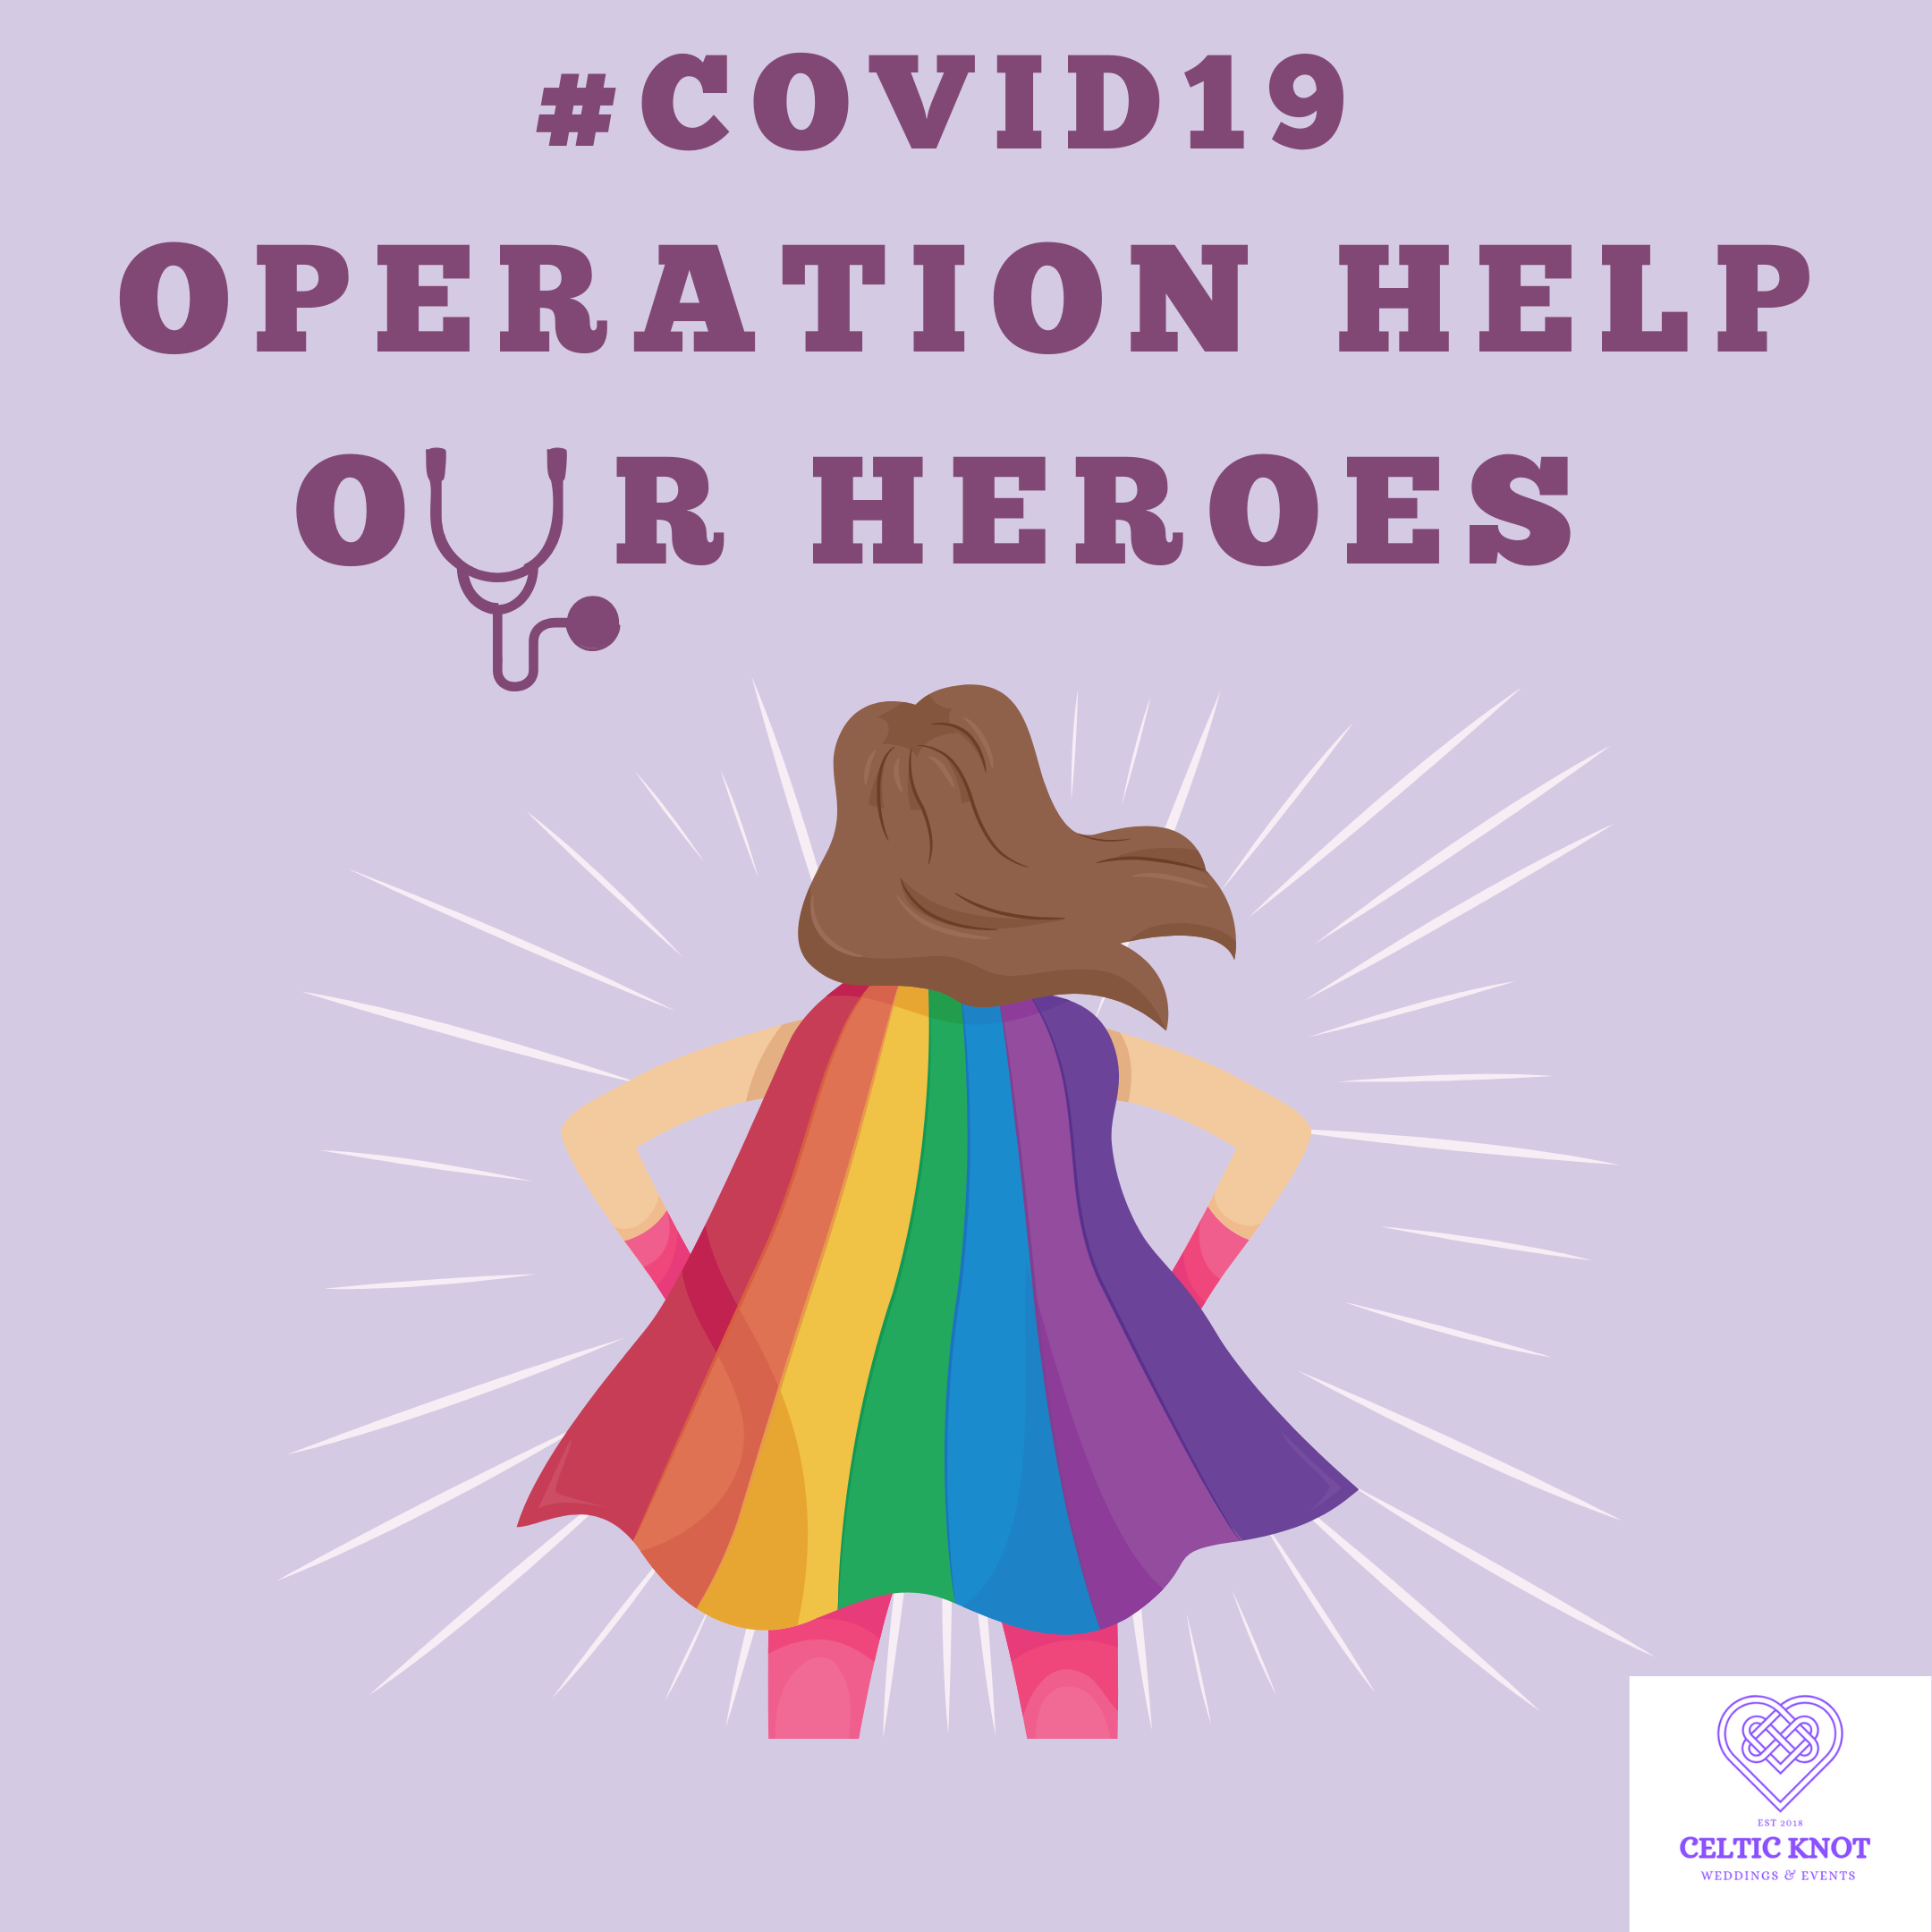 #Covid19 Operation Help Our Heroes: Wedding suppliers band together for frontline workers